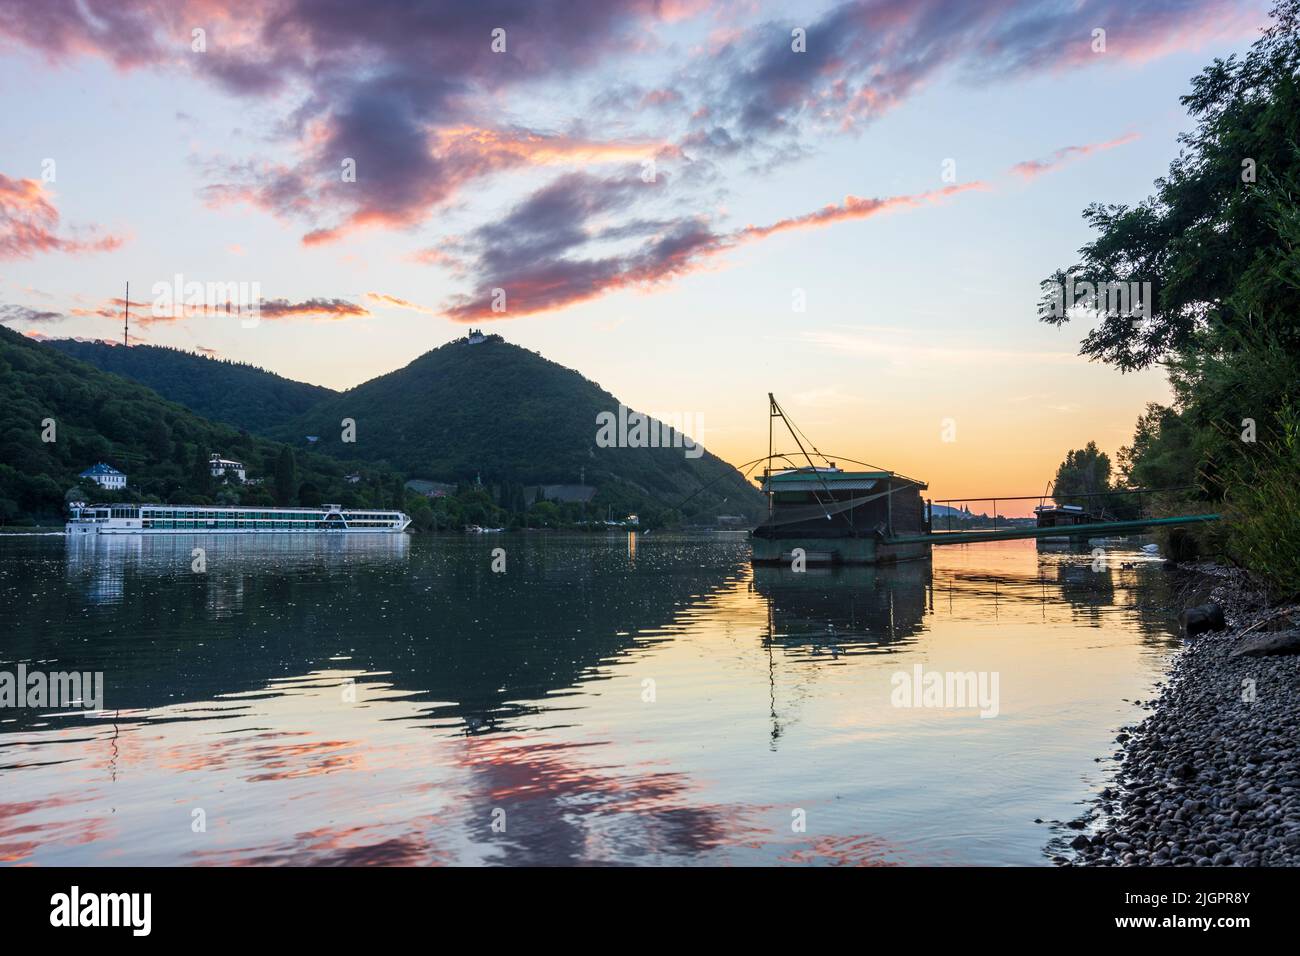 Wien, Vienna: sunset at river Donau (Danube), view to mountain Kahlenberg (left) and Leopoldsberg (with church), Daubel boat with lifting fishing net, Stock Photo